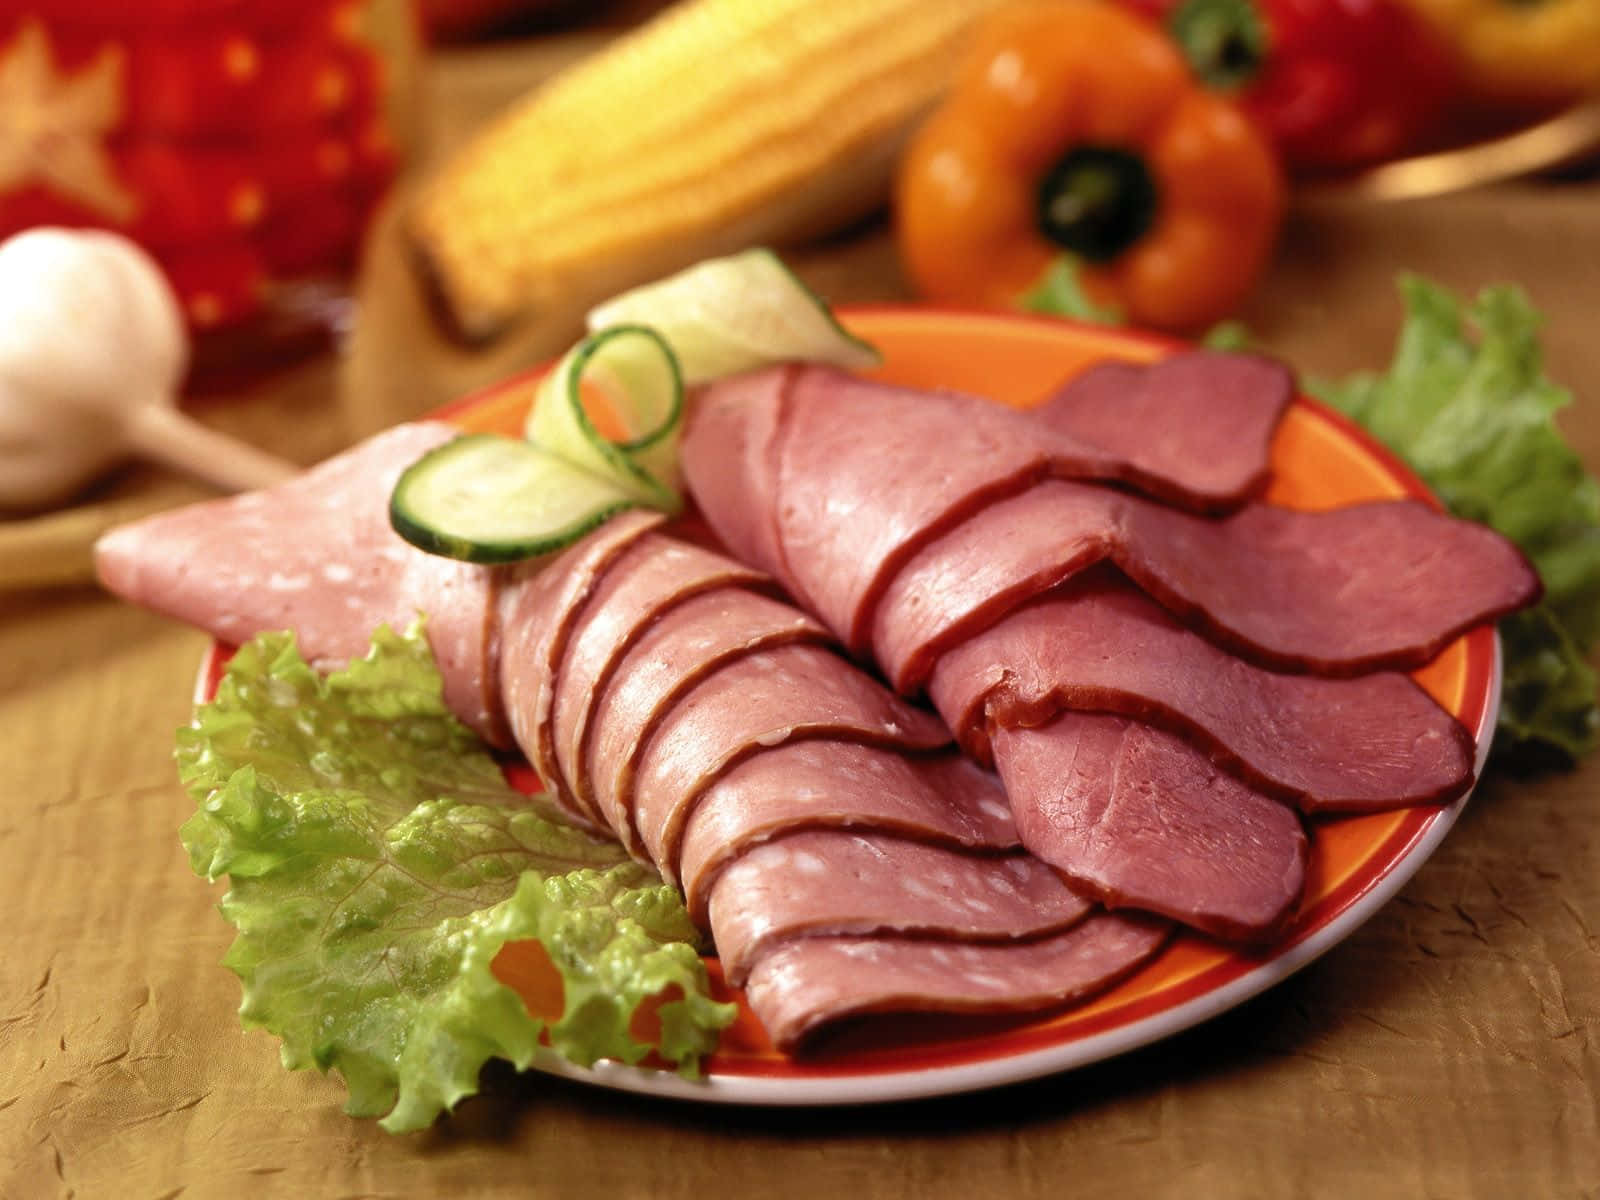 Sliced Ham On A Plate With Vegetables